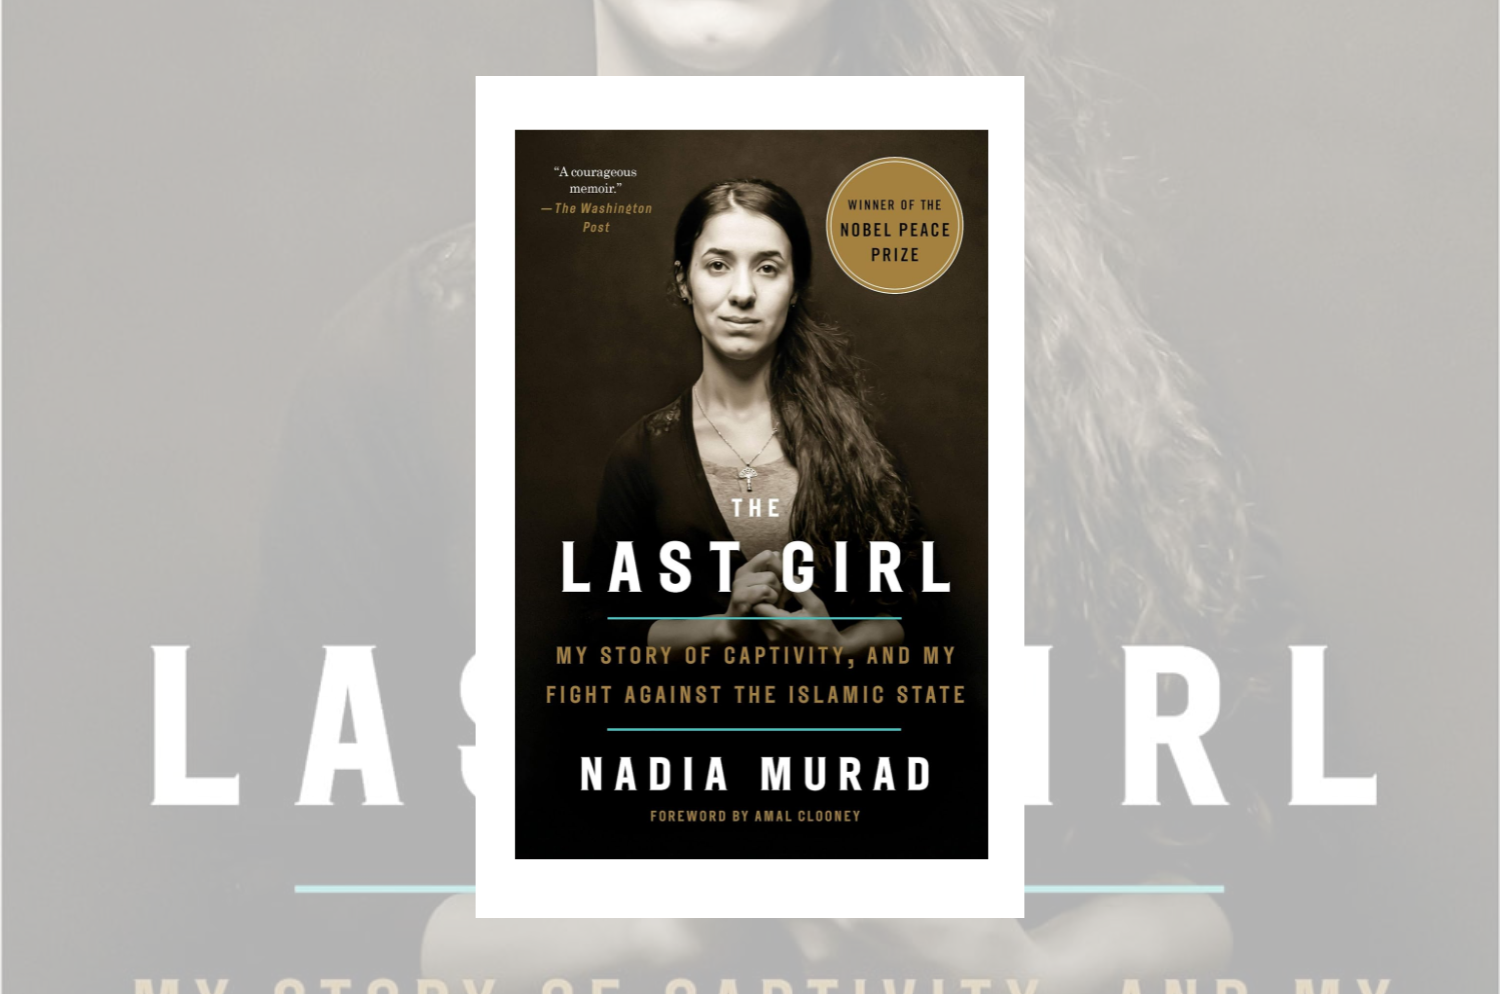 “The Last Girl: My Story of Captivity, and My Fight Against the Islamic State” by Nadia Murad